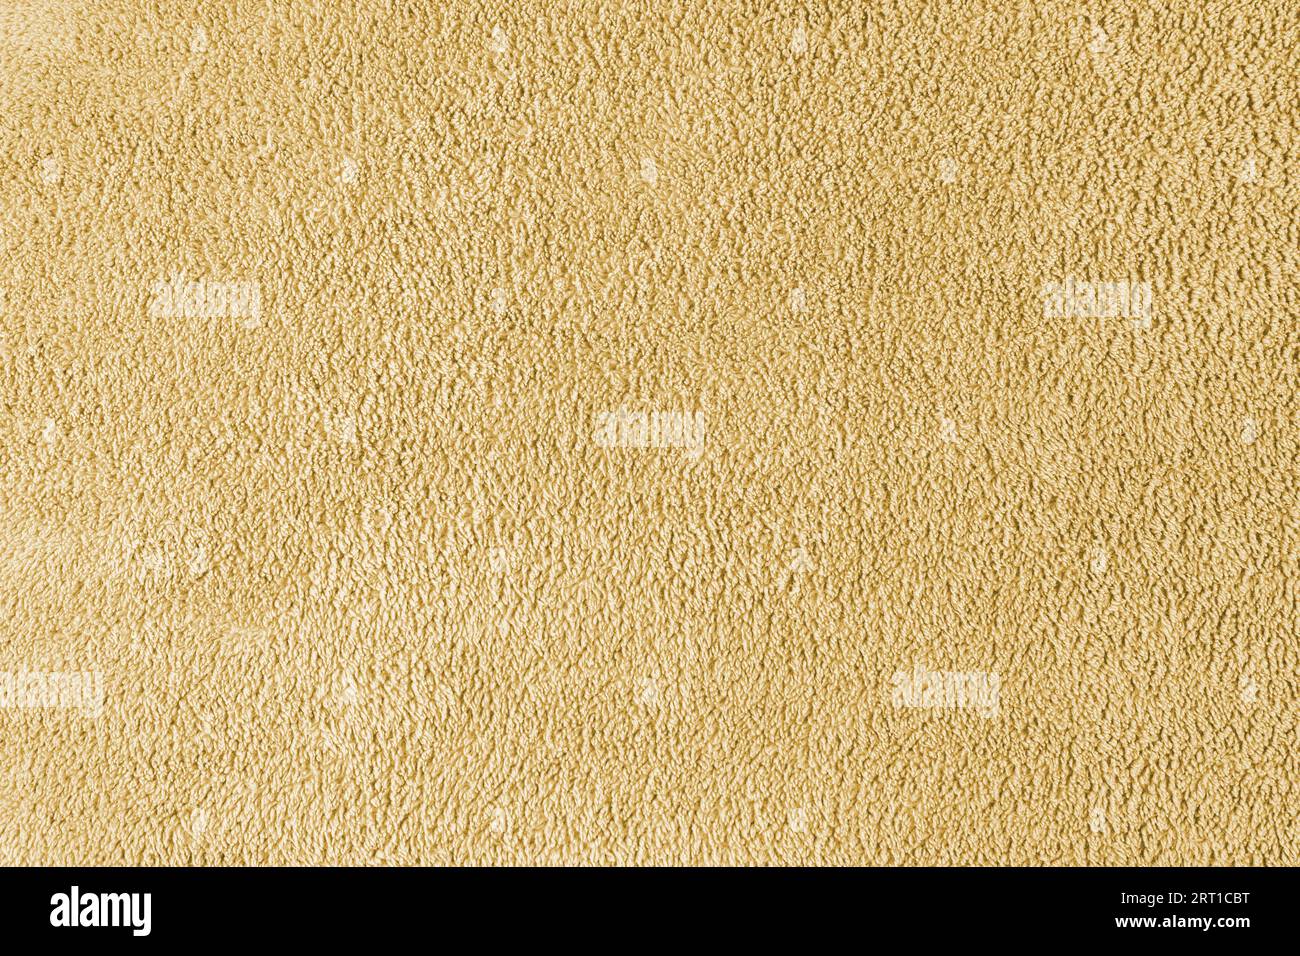 Terry cloth, yellow towel texture background. Soft fluffy textile bath or beach towel material. Top view, close up. Stock Photo